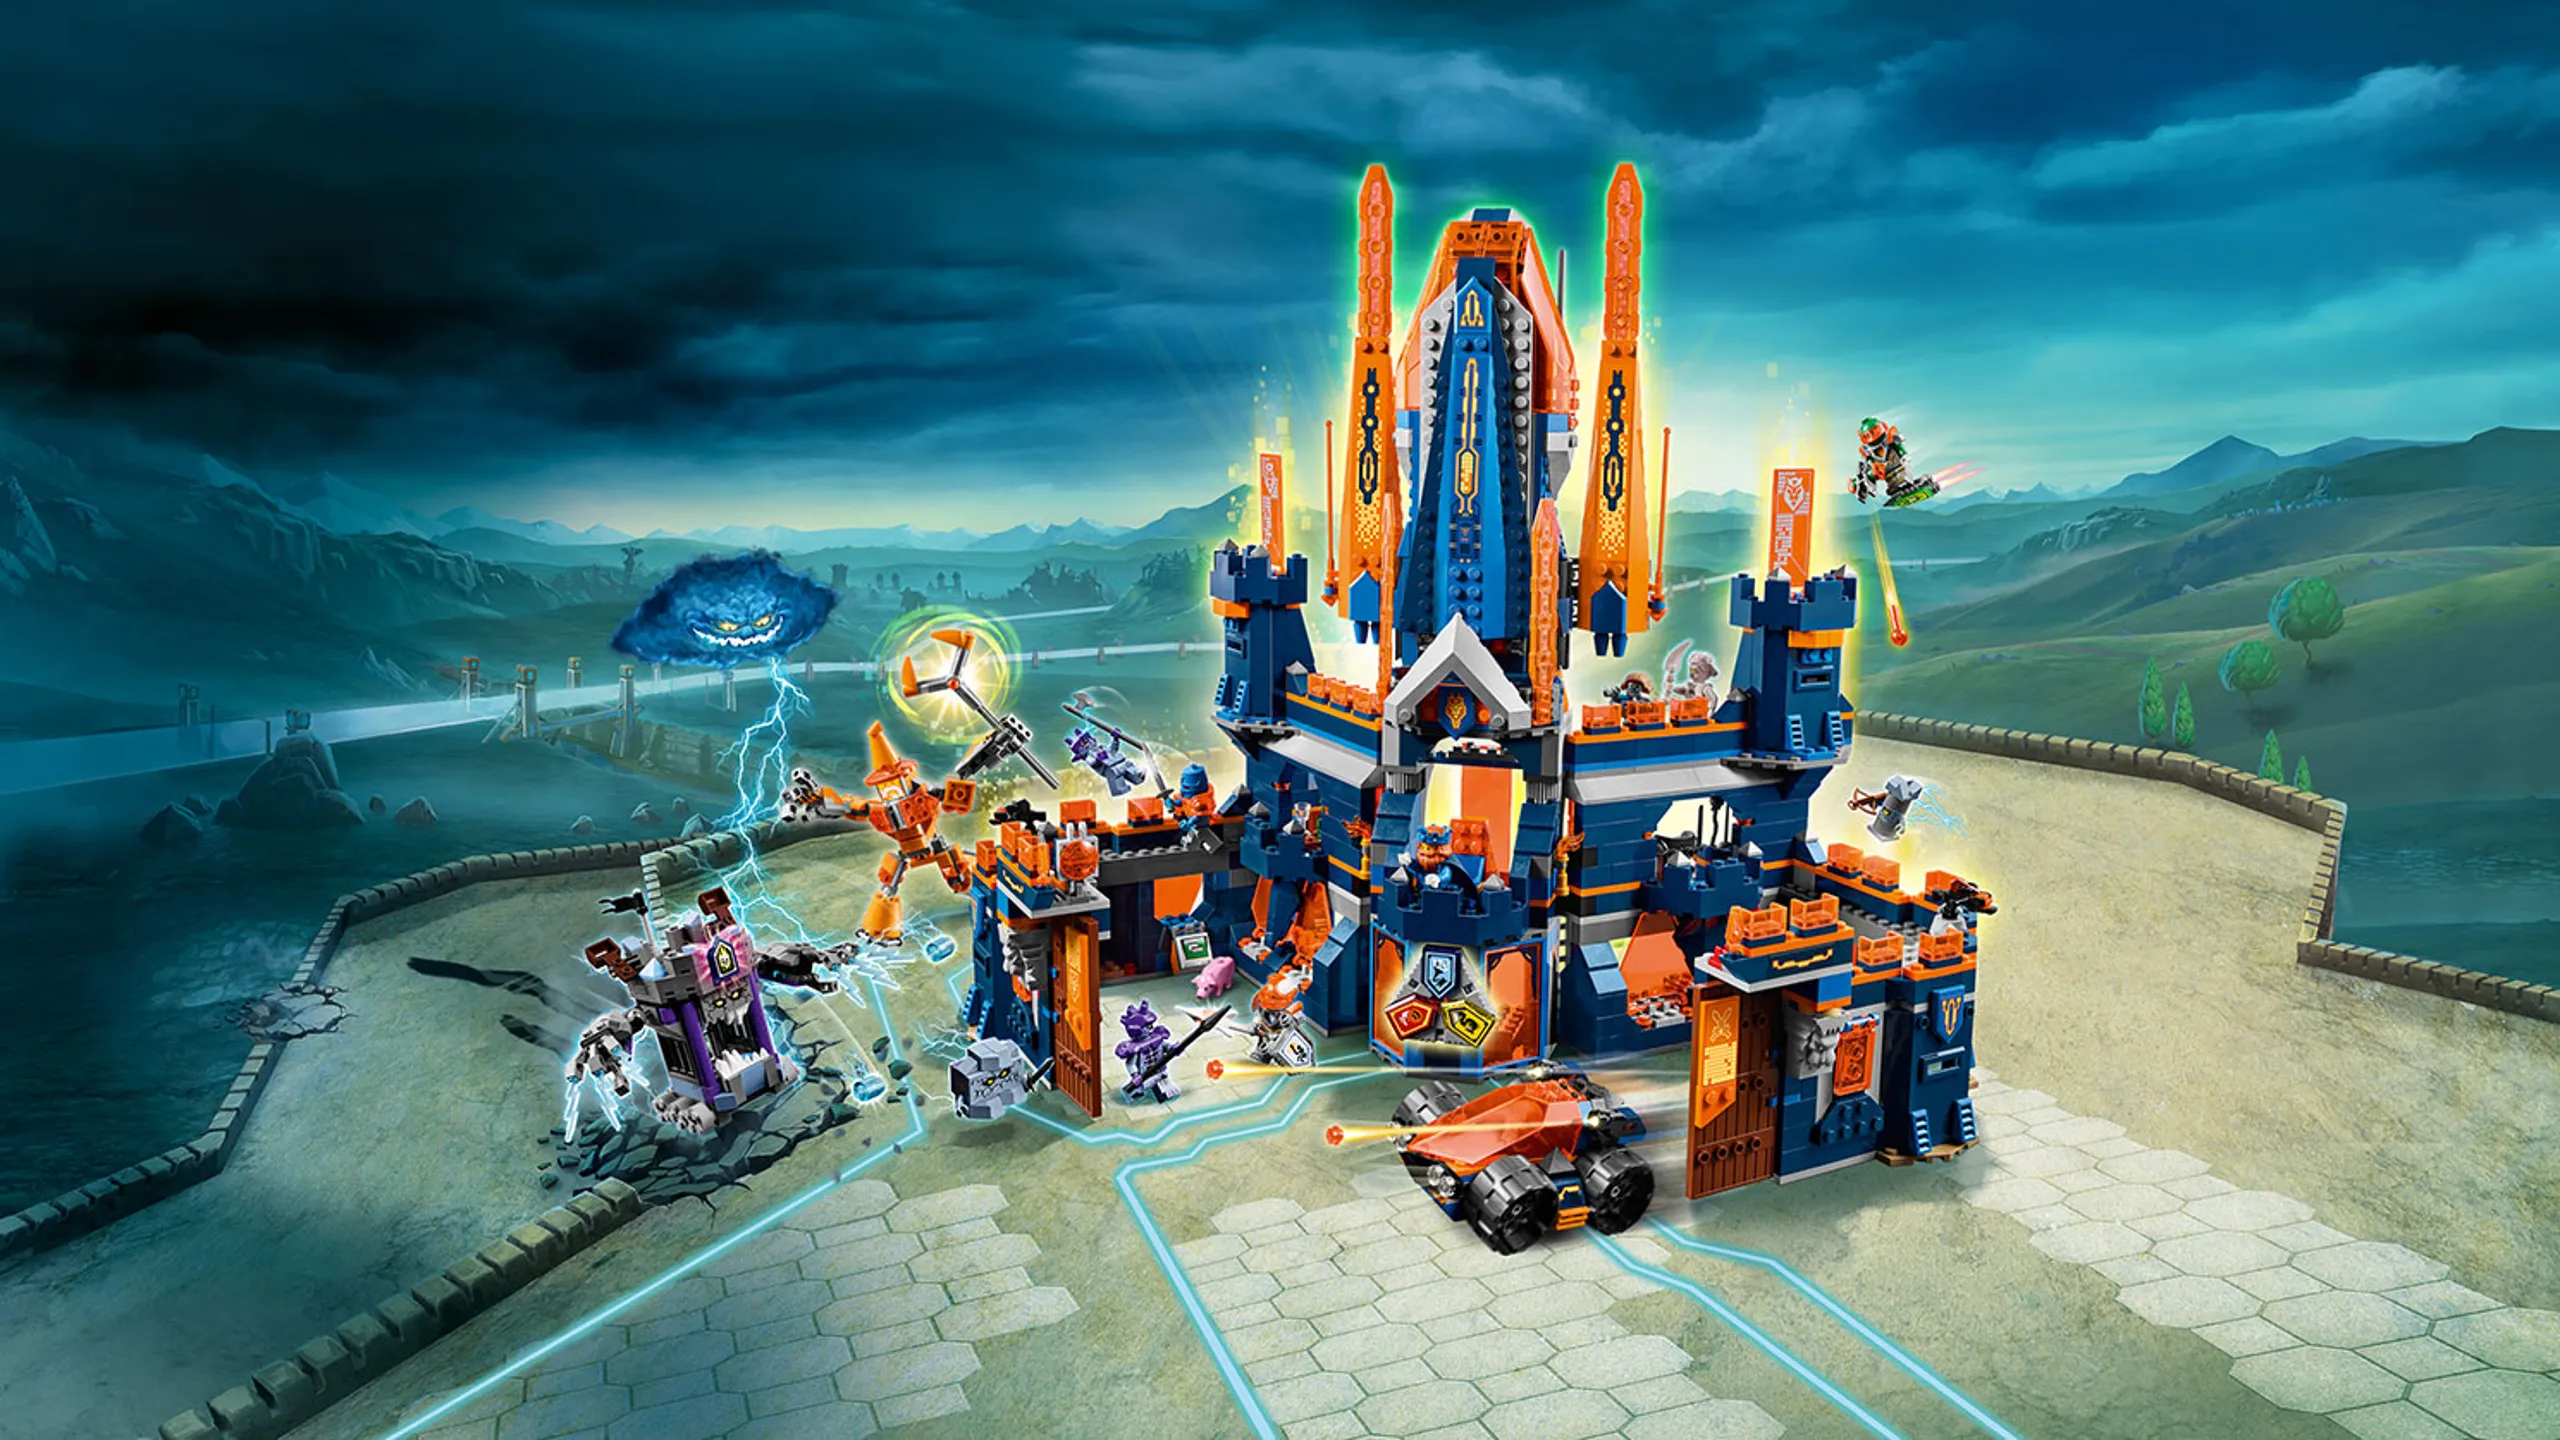 LEGO NEXO KNIGHTS - 70357 Knighton Castle - Prepare the castle for battle! Fire the stud shooters and open the gate to send out Robin’s vehicle and even holographic Merlok 2.0 can join in the action thanks to Robin’s Mechlok mech suit.